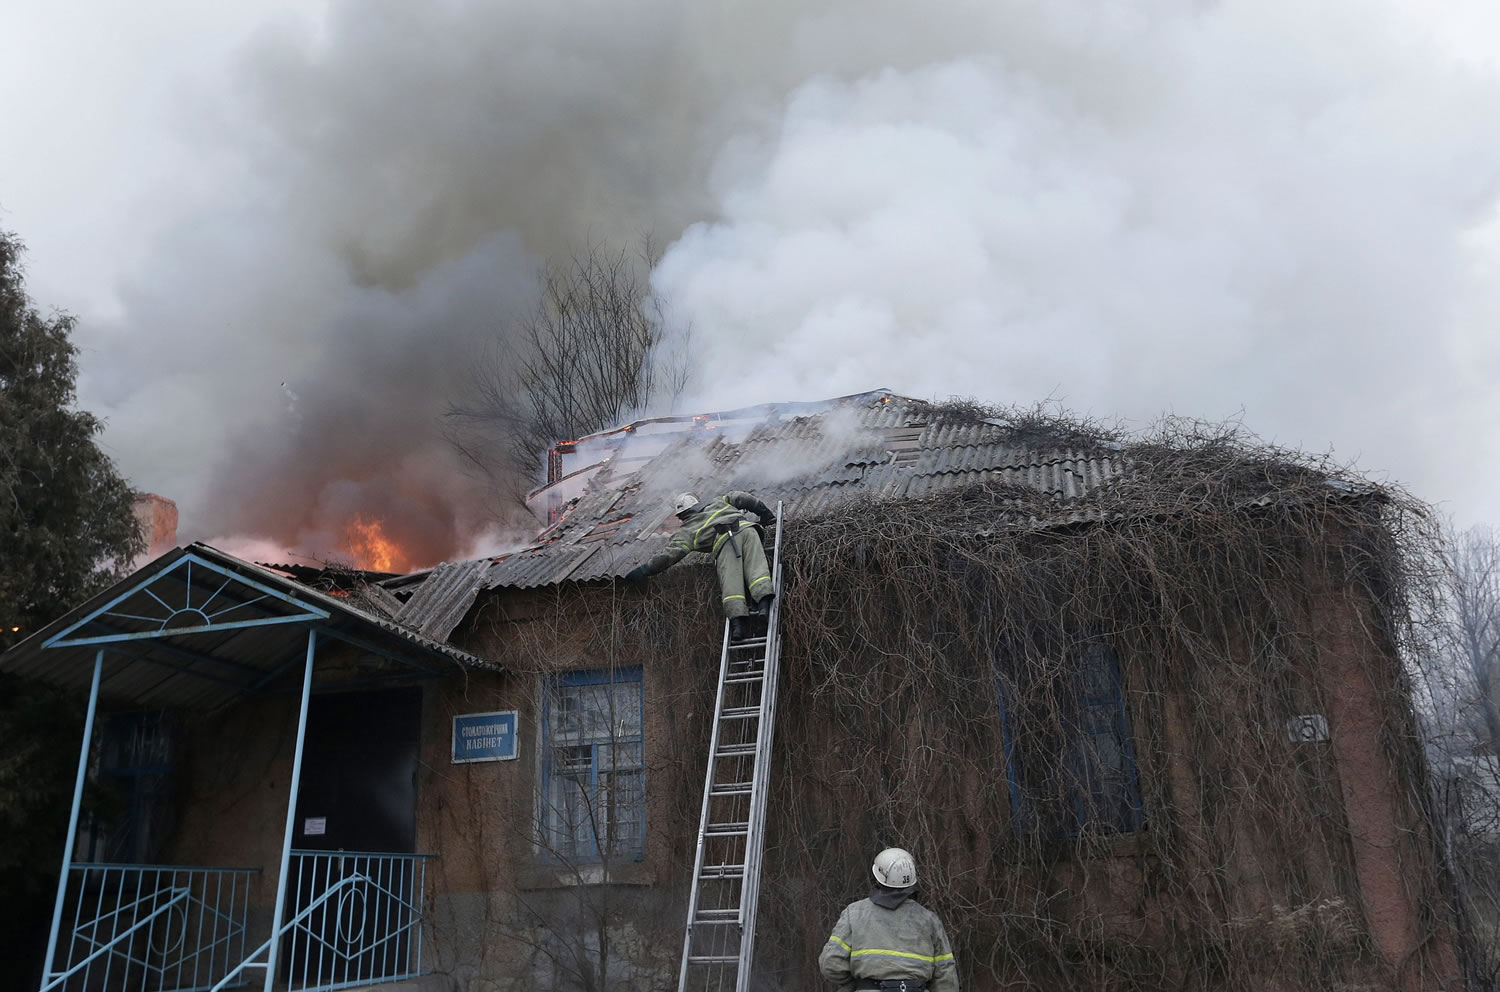 Firefighters try to extinguish a building on fire after shelling between Russian-backed separatists and Ukrainian government forces in Artemivsk, Ukraine, on Saturday before the cease-fire deadline.